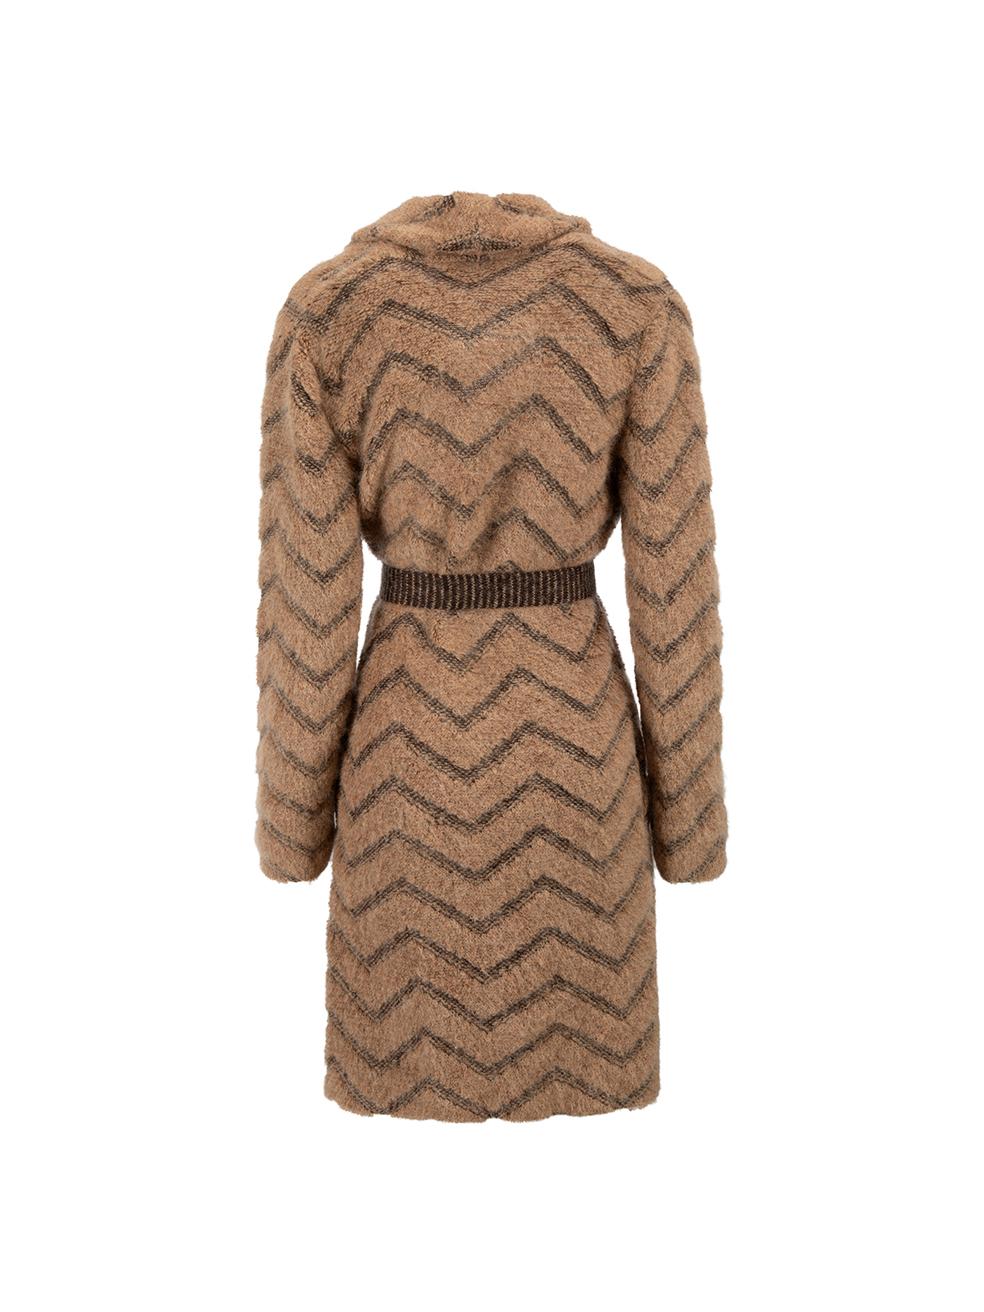 Missoni Brown Wool Long Knit Cardigan Size S In New Condition For Sale In London, GB